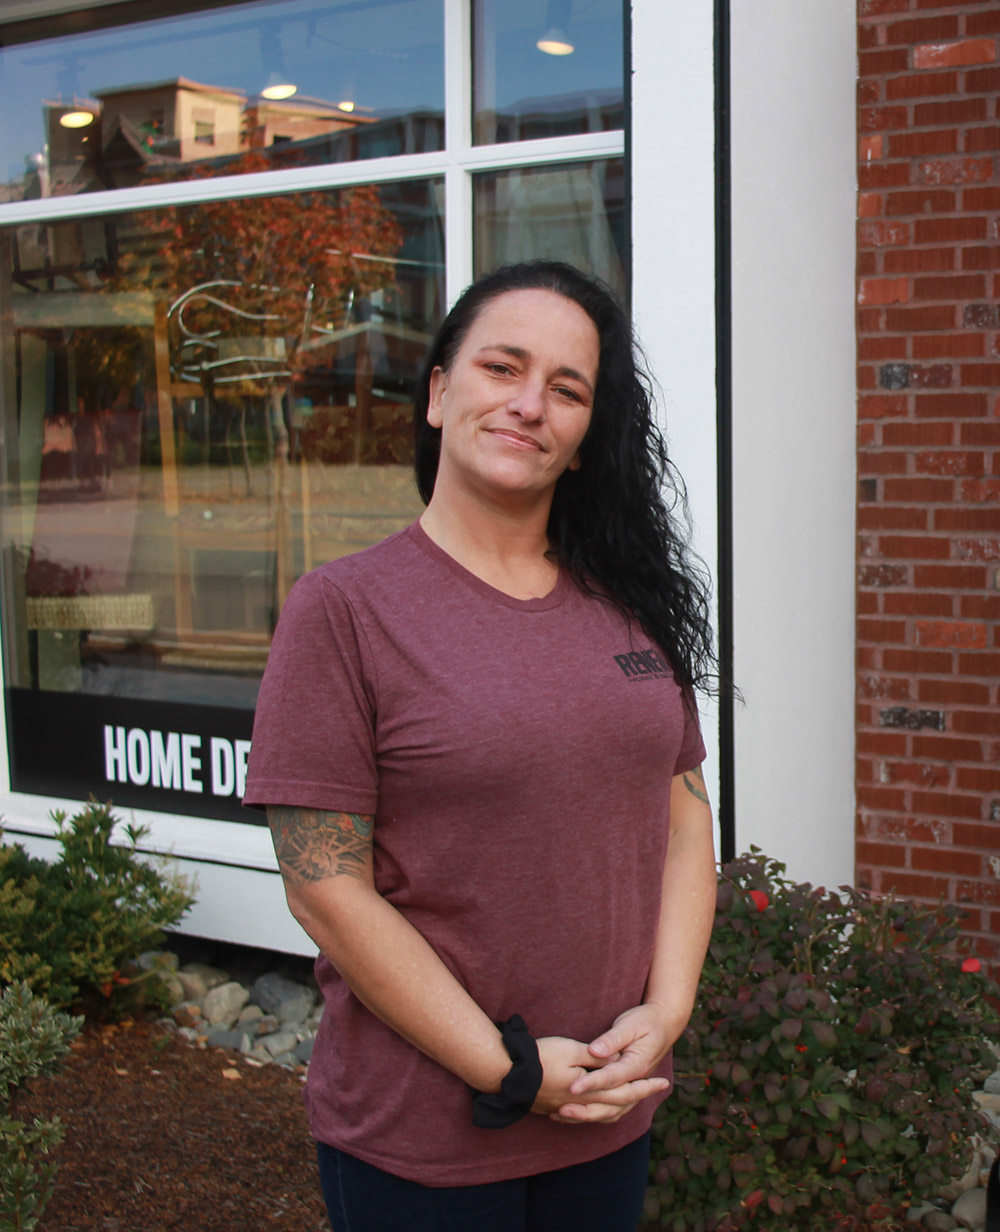 Photo of a woman with tattoos, clasping her hands in front of RENEW Home and Decor.